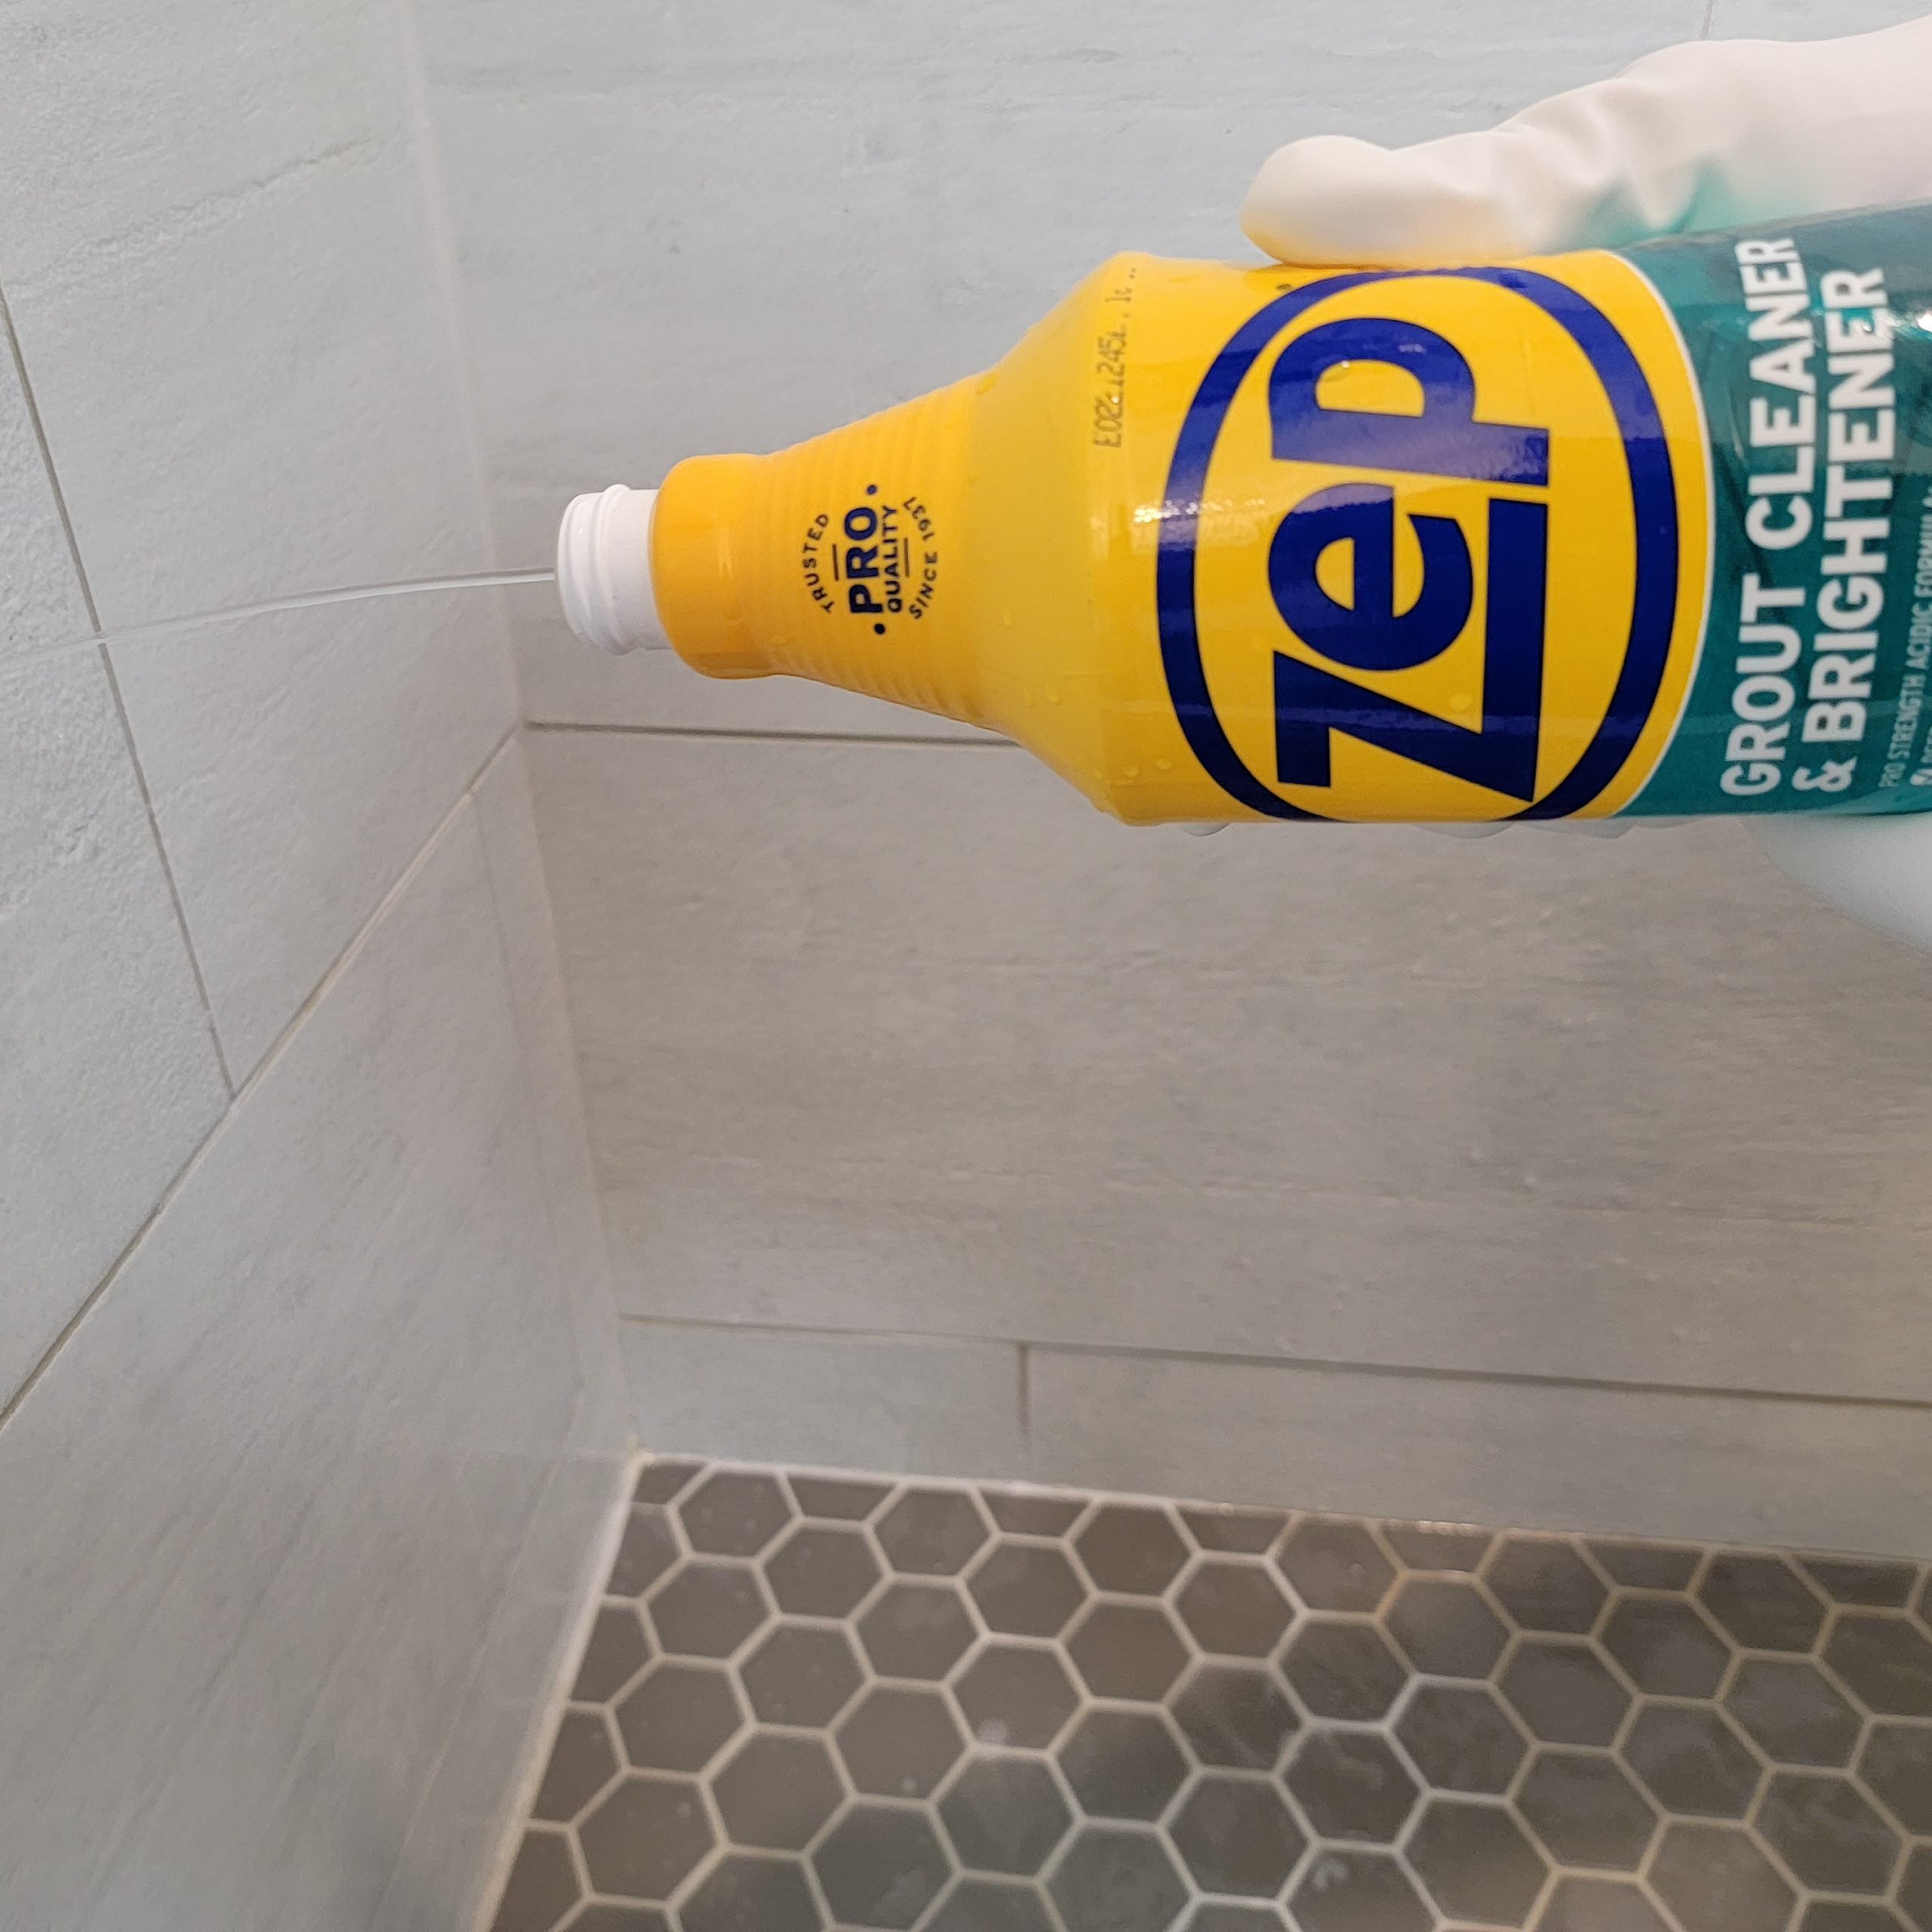 cleaning the bathroom tile and grout with zep cleaner